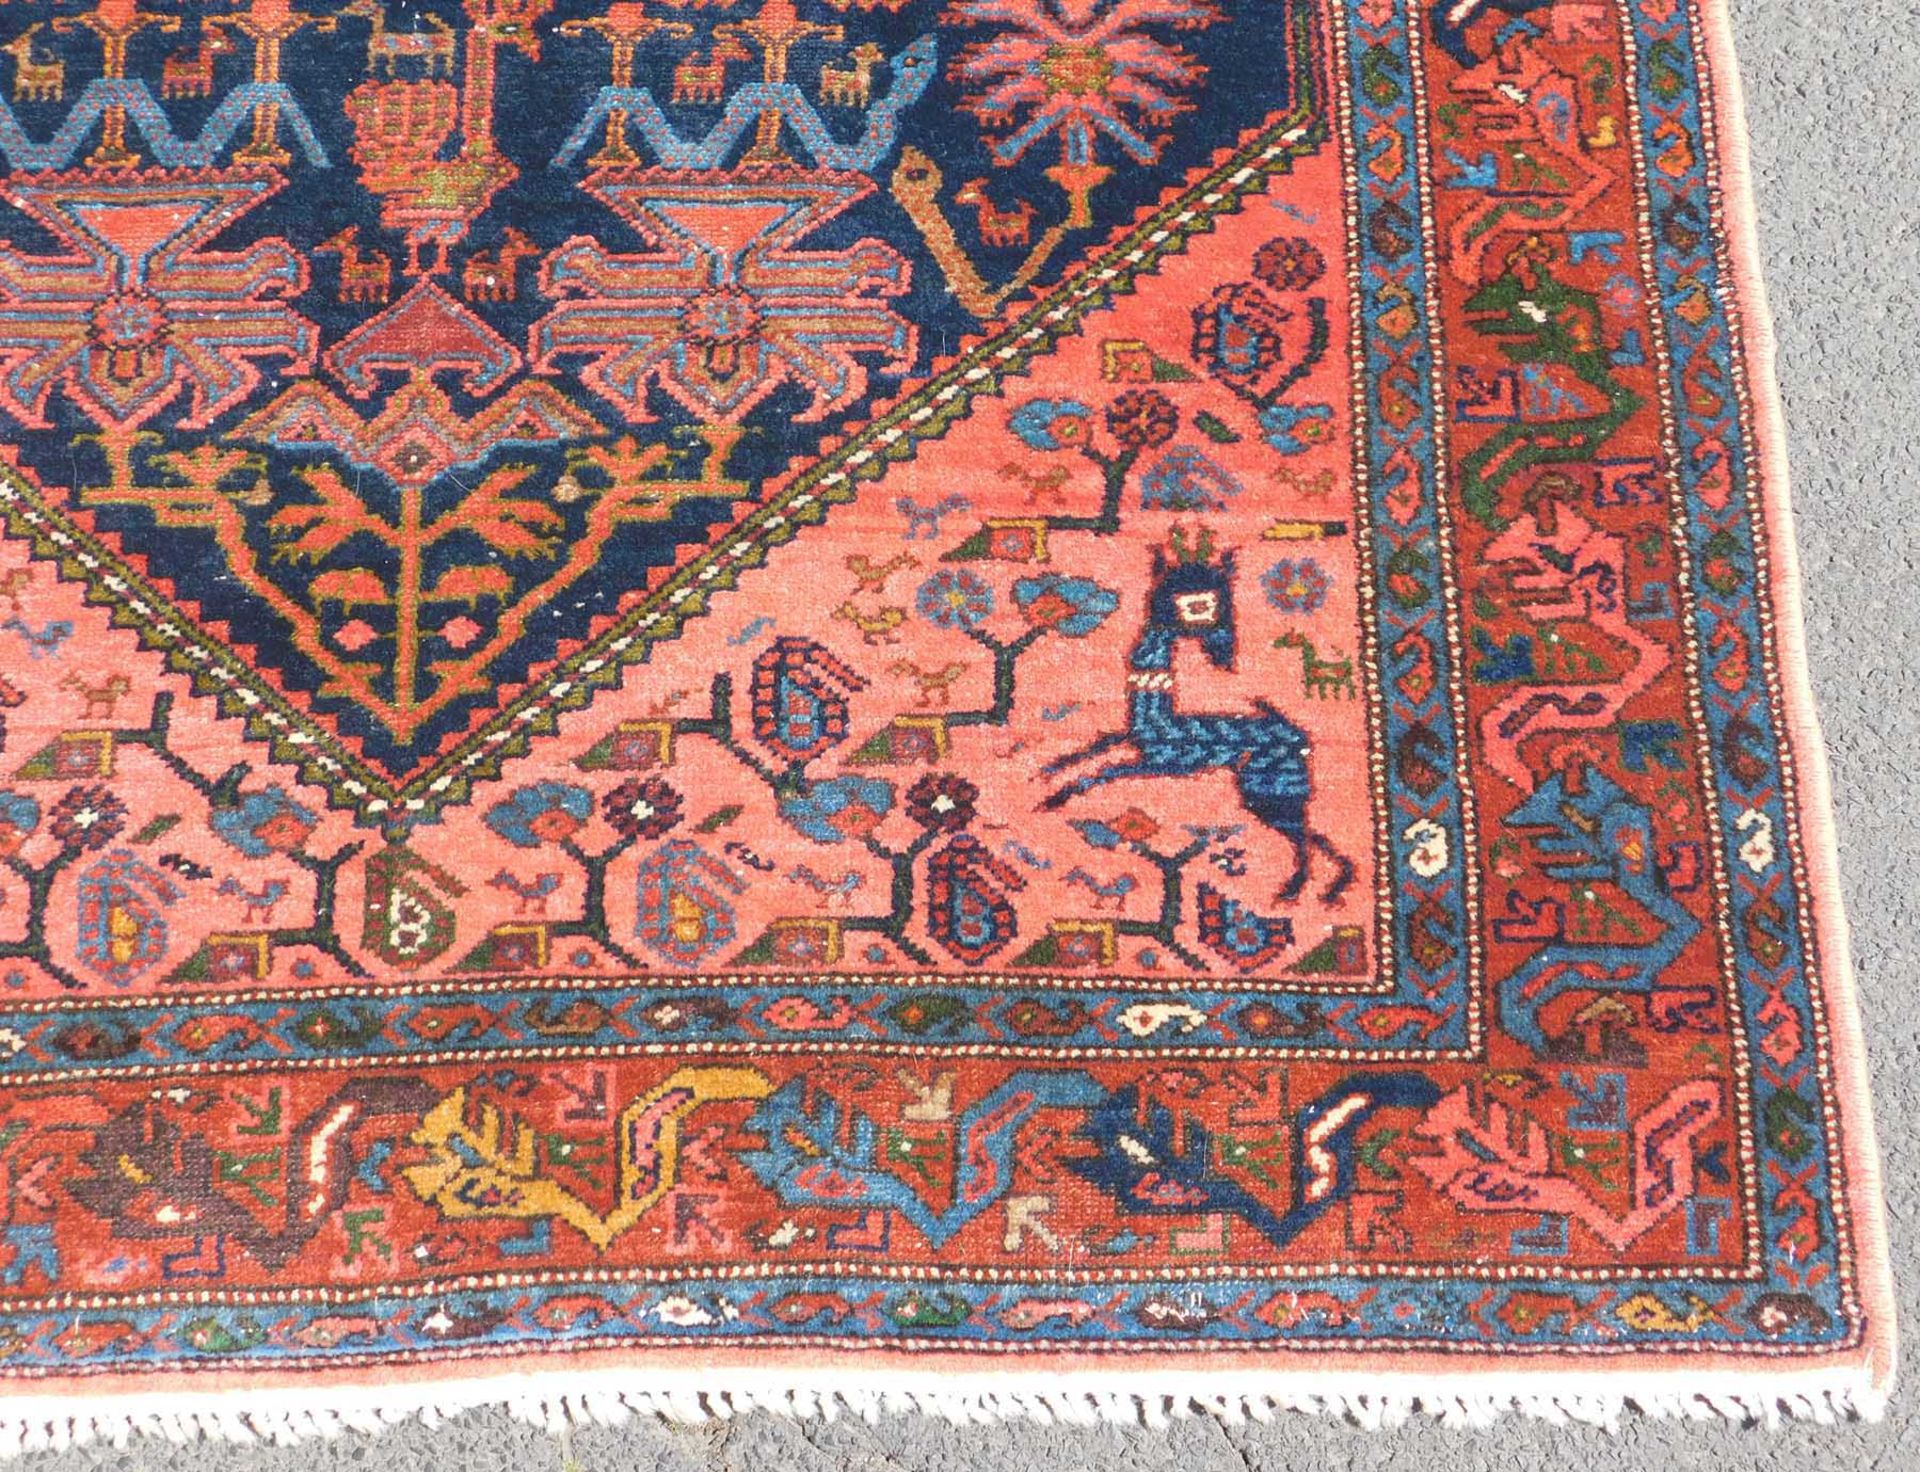 Nahawand Persian rug. Iran. Old. 1st Half of the 20th century.197 cm x 130 cm. Knotted by hand. Wool - Image 5 of 11